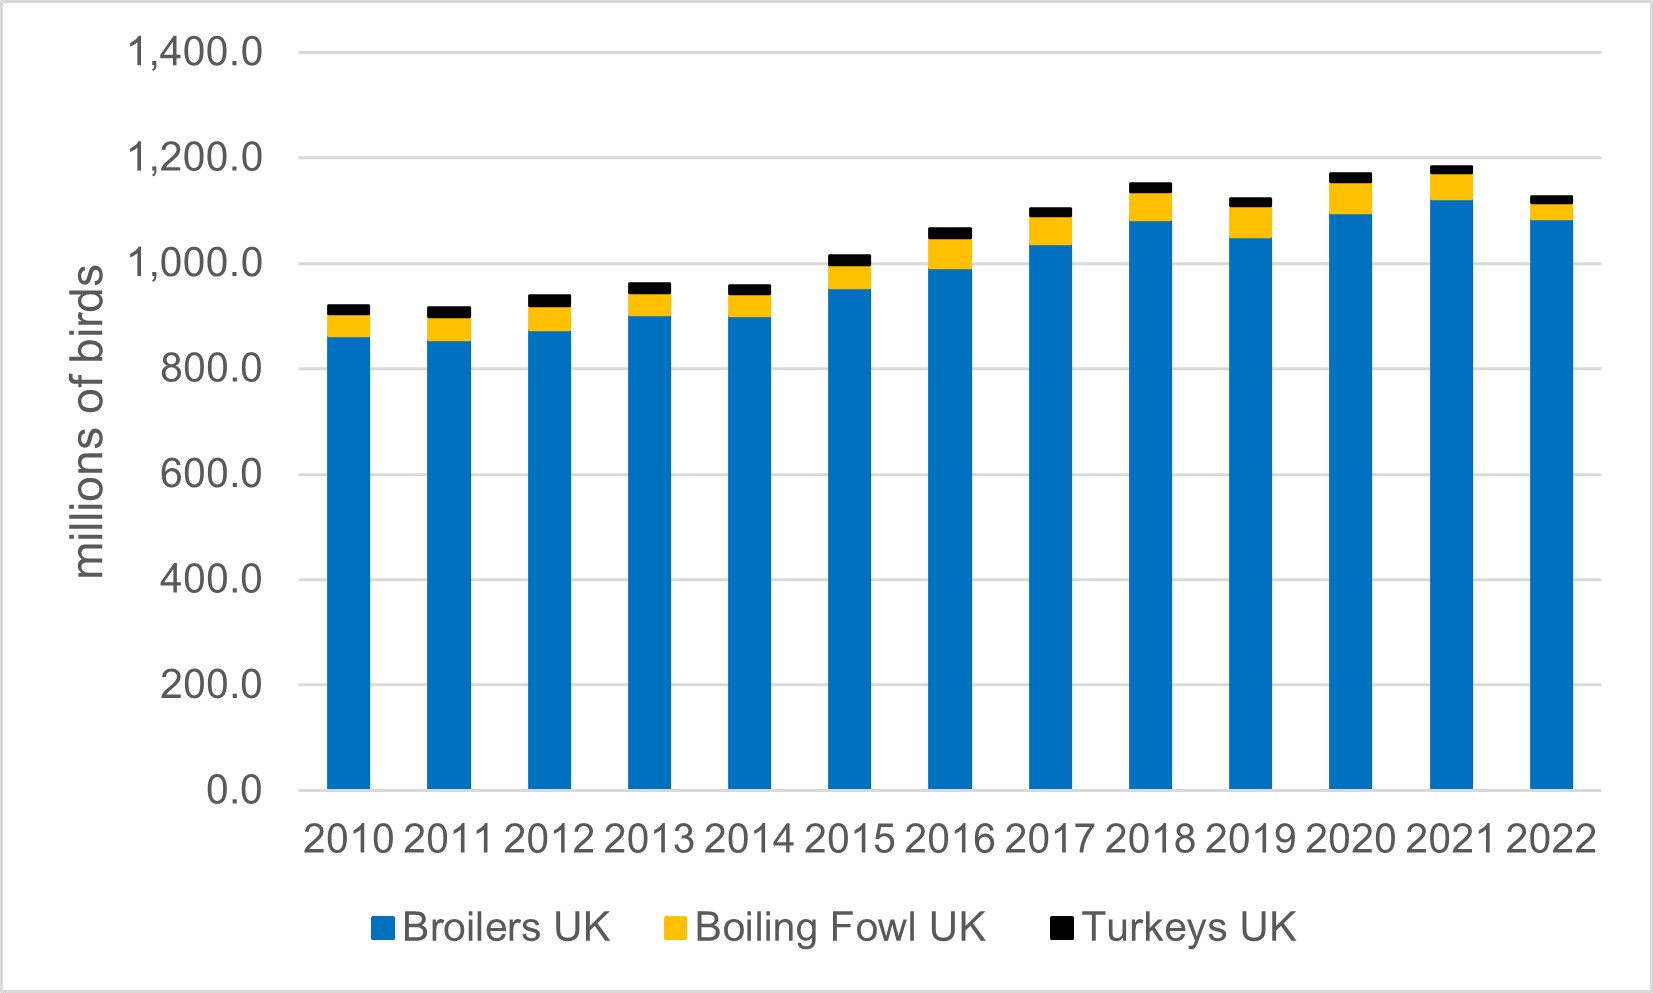 Bar chart depicting the number of poultry slaughtered per year in the UK from 2010 to 2022. Represented as millions of birds. The blue section of each bar represents broilers, yellow represents boiling fowl and black represents Turkeys.